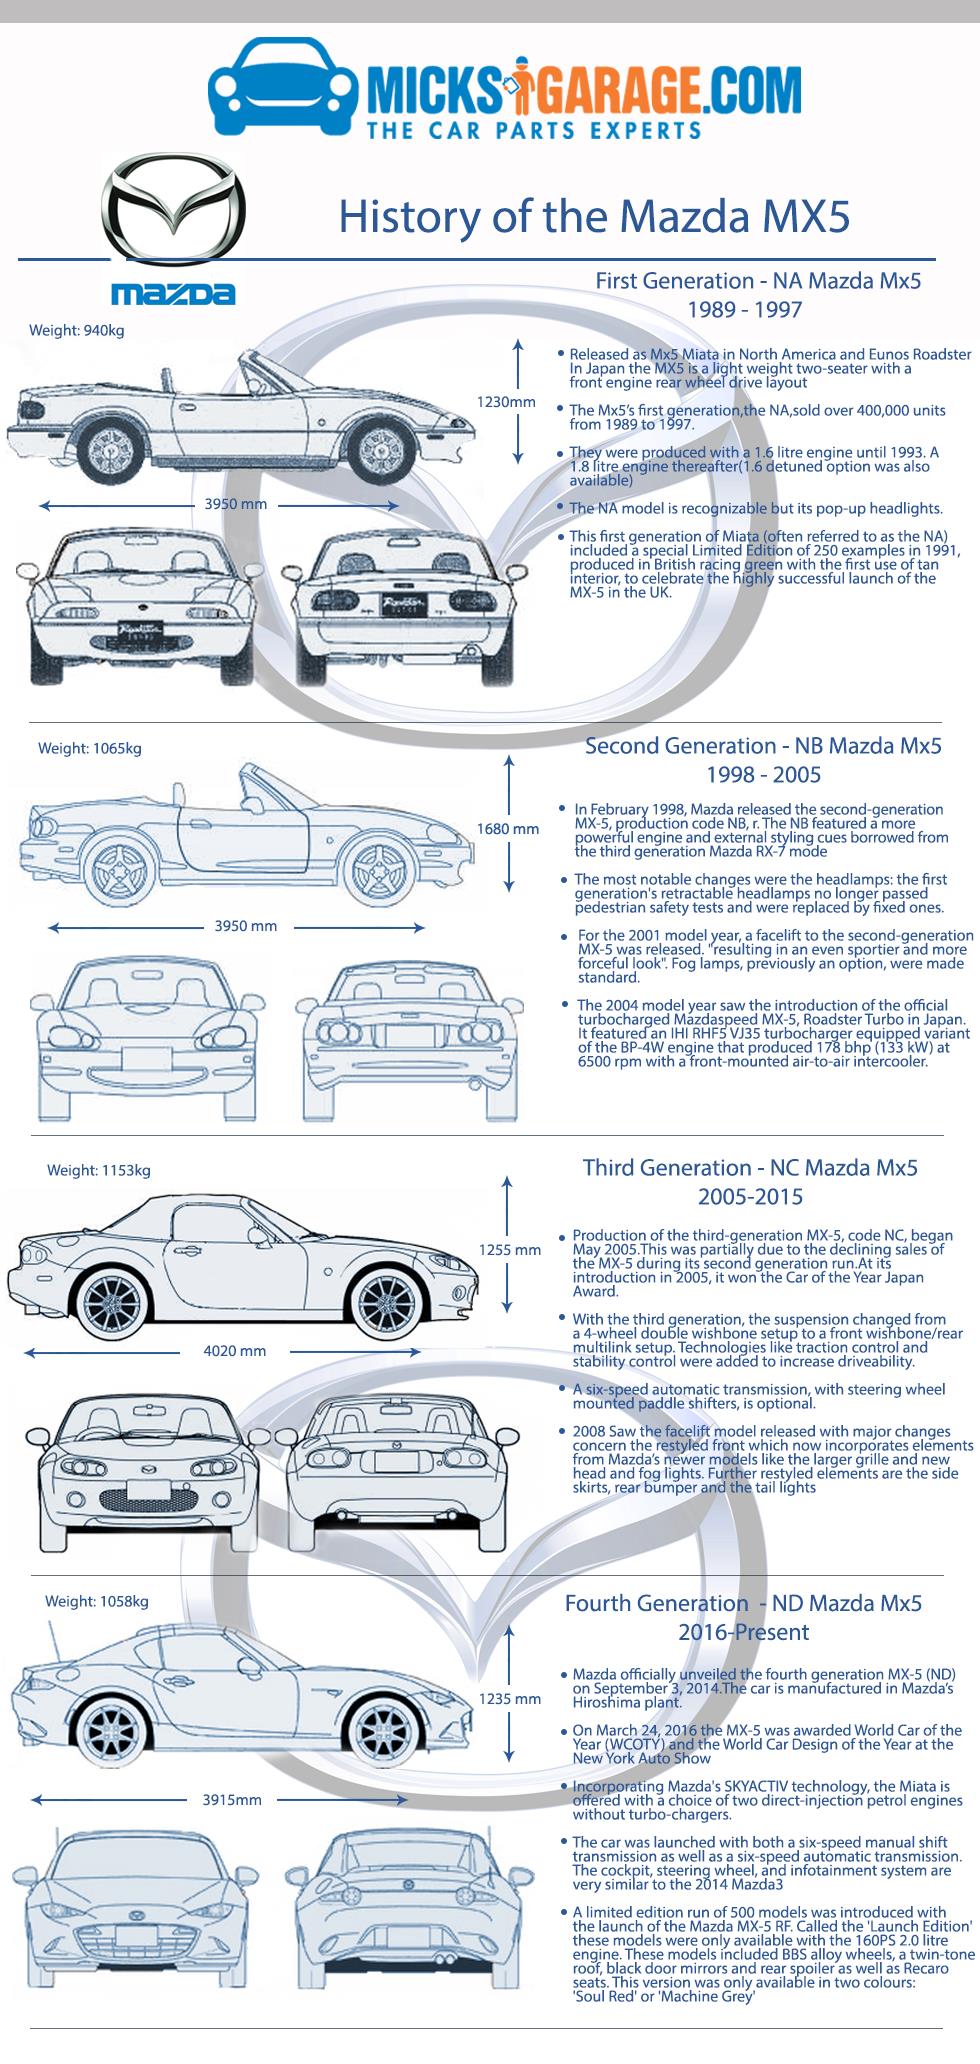 INFOGRAPHIC: HISTORY OF THE Mazda MX5